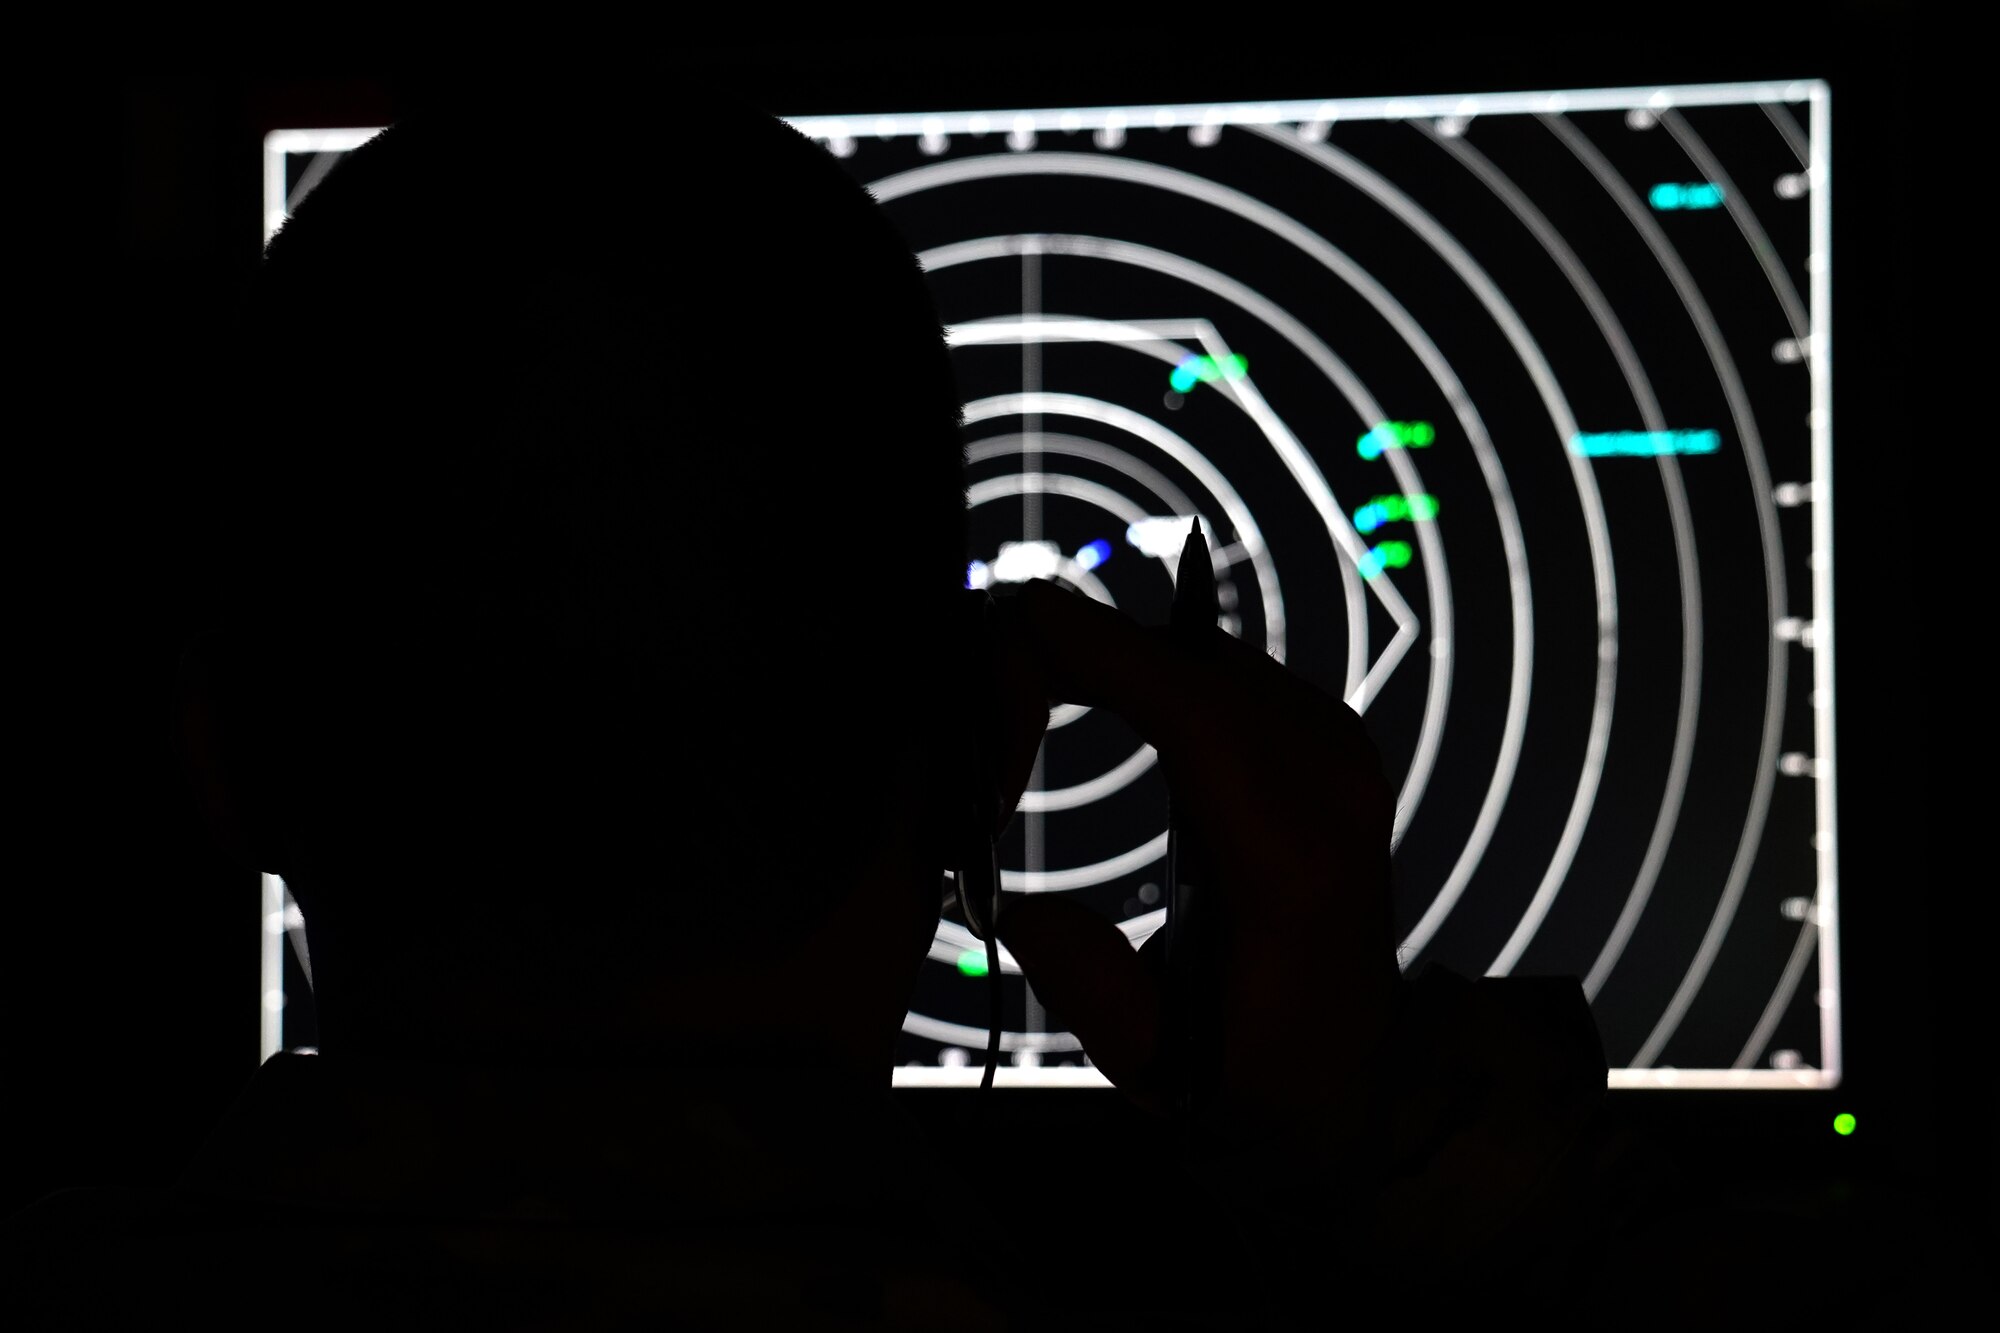 U.S. Air Force Tech. Sgt. Dereck Padgett, 334th Training Squadron air traffic control instructor, practices air traffic simulations inside Cody Hall at Keesler Air Force, Mississippi, March 4, 2020. Padgett was selected to be a part of the Air Education and Training Command Air Traffic Control Rapid Response team, initiated to combat the potential loss of manning due to COVID-19. (U.S. Air Force photo by Senior Airman Seth Haddix)